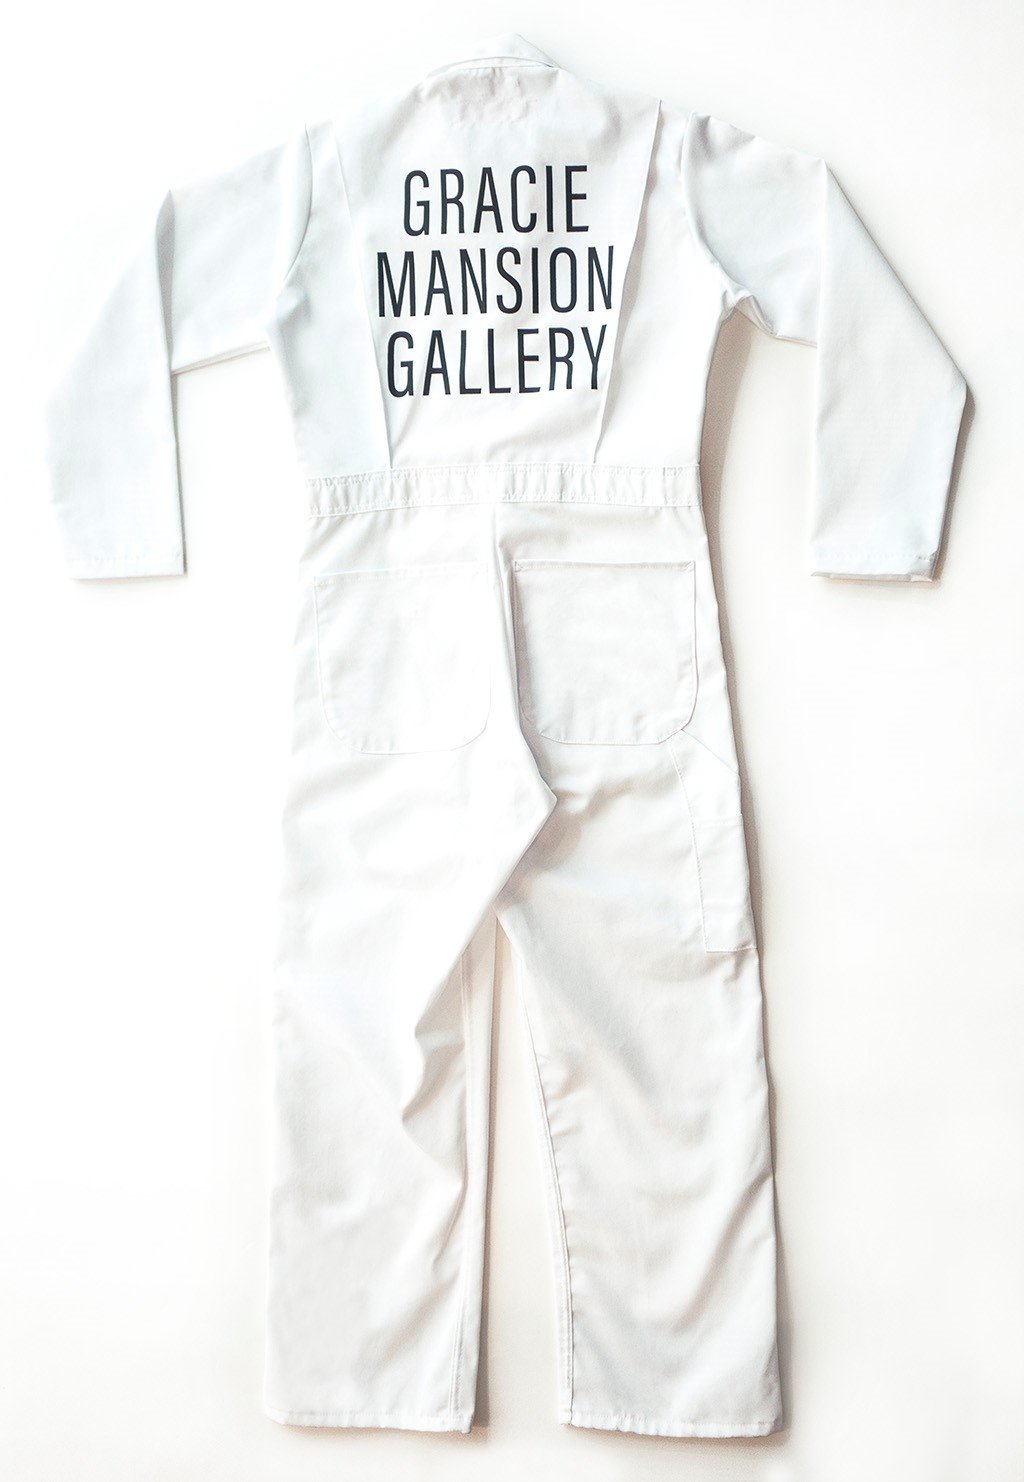 A replica of a Gracie Mansion Gallery jumpsuit from a 1985 PEOPLE Magazine photoshoot.Photo: Amanny Ahmad, from the collection of Gracie Mansion, courtesy Red Bull Studios.